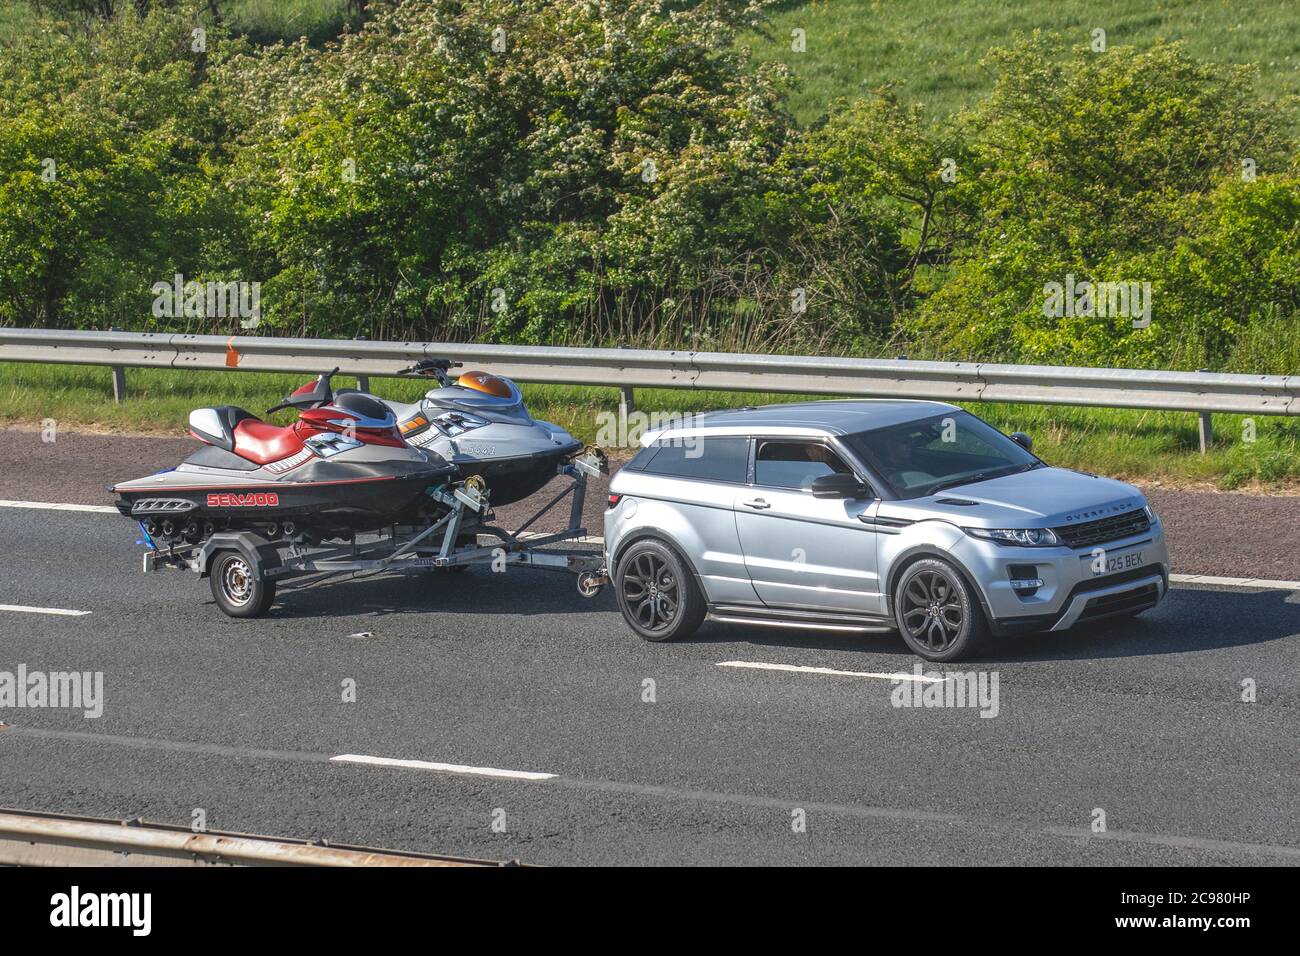 2011 Land Rover Range Rover Evoque Dynamic towing double Sea-Doo personal watercraft Jet Ski trailer; Vehicular traffic moving vehicles, cars driving vehicle on UK roads, motors, motoring on the M6 motorway highway network. Stock Photo